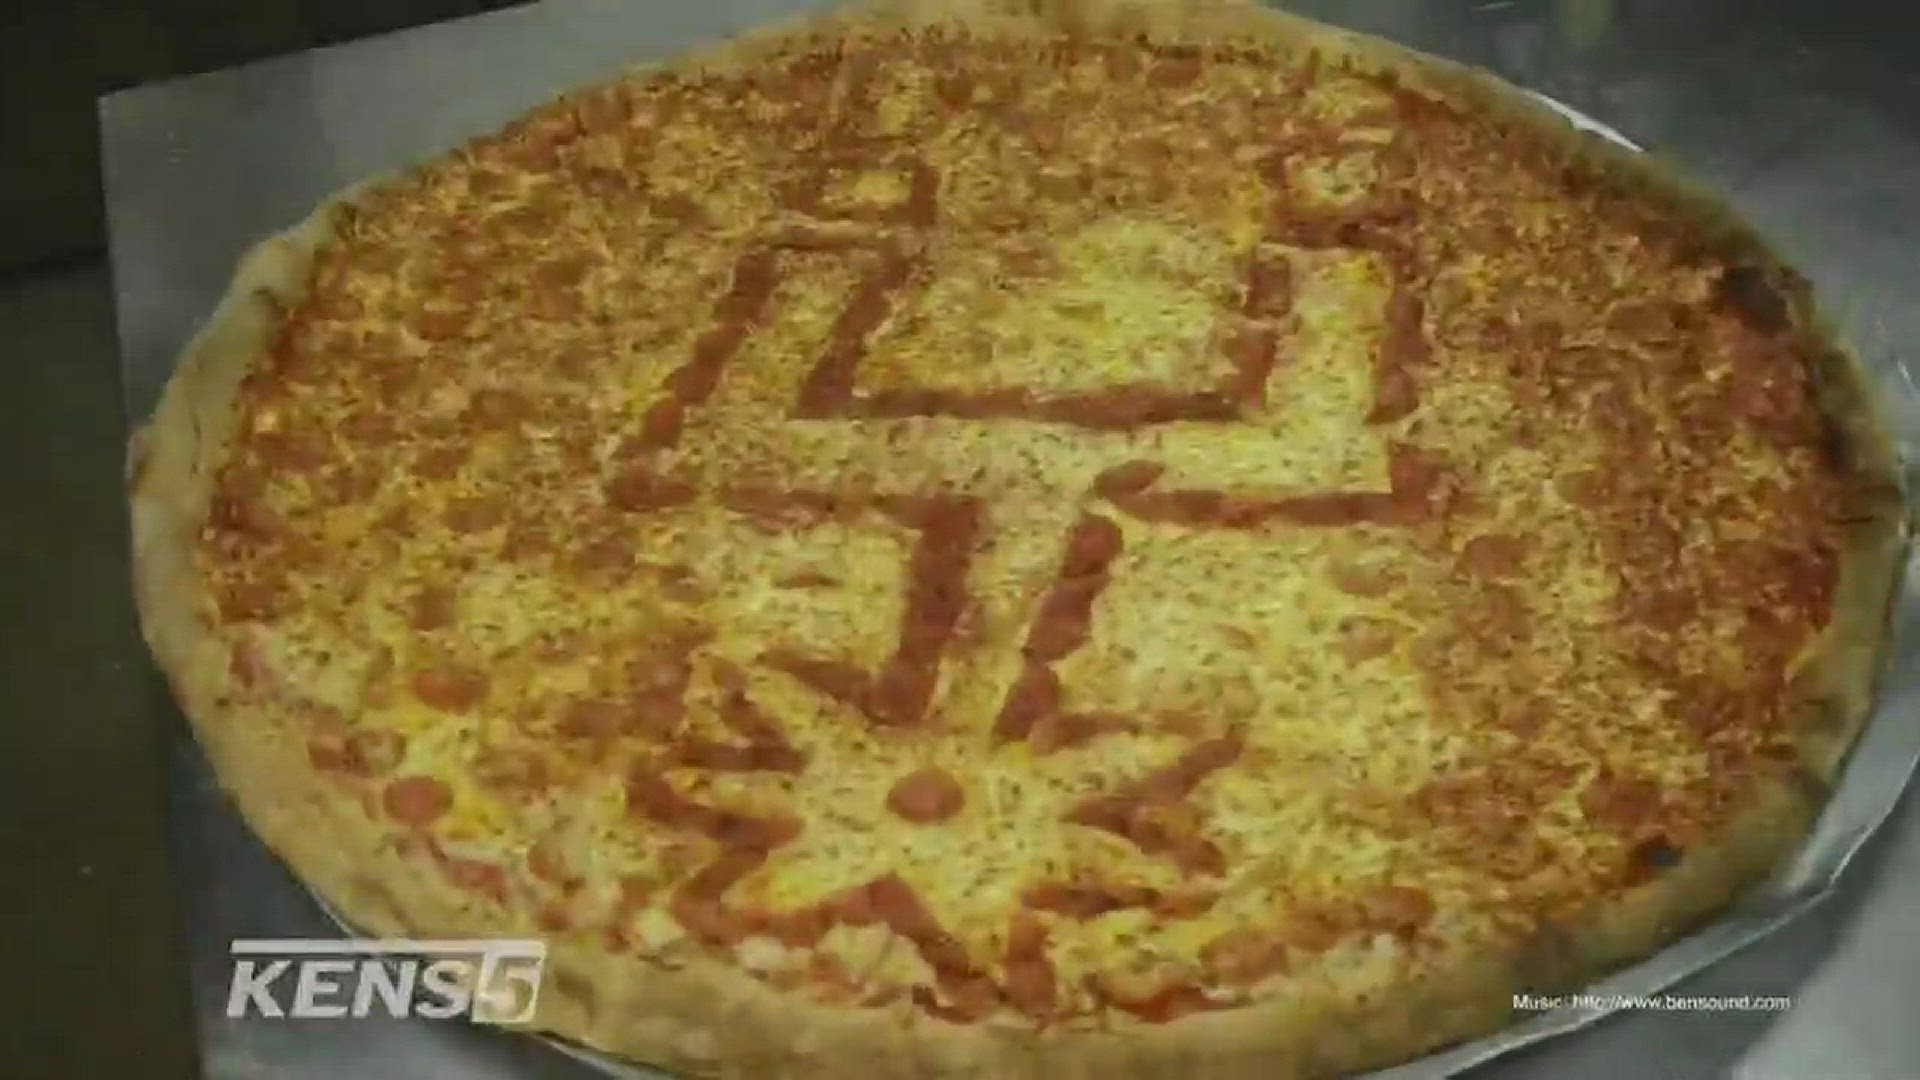 To think it all started with a family friend who inspired Carlo to get creative with his 62-inch pizzas which now include the Spurs logo, Spurs coyote, or even portraits of your favorite players.